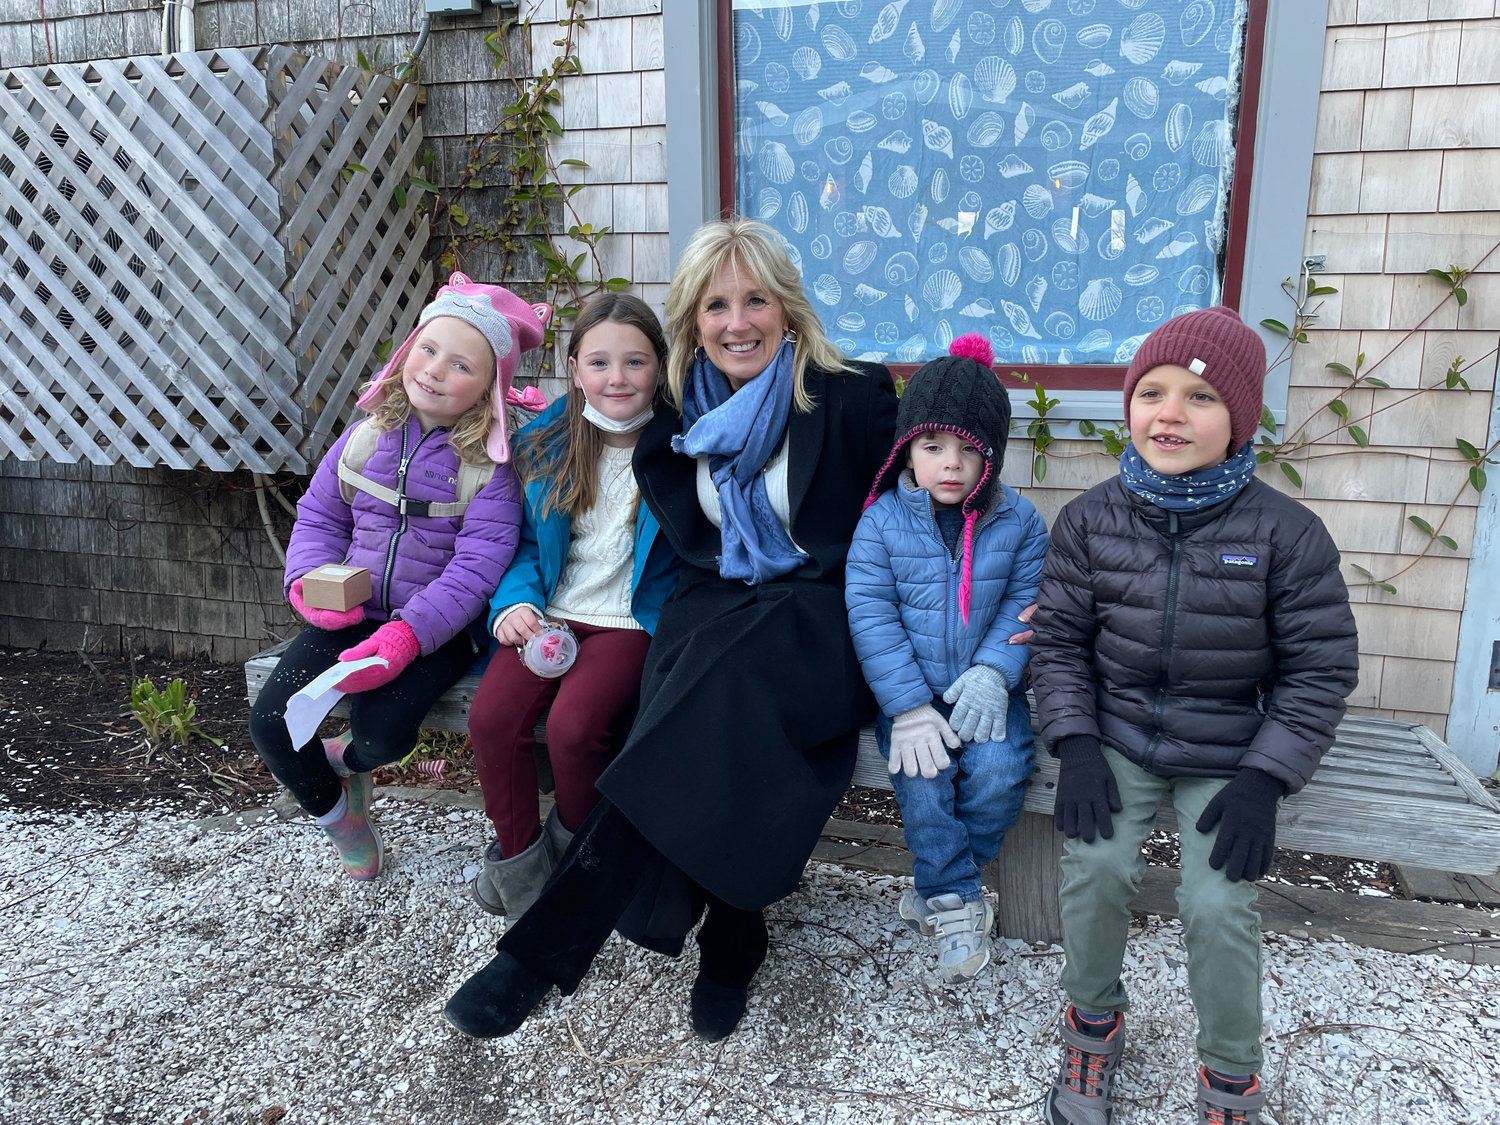 First Lady Jill Biden with Rosey Baker, Una Wixted, Desmond Wixted and Mykolas Zilyte outside Slip 14 Saturday.